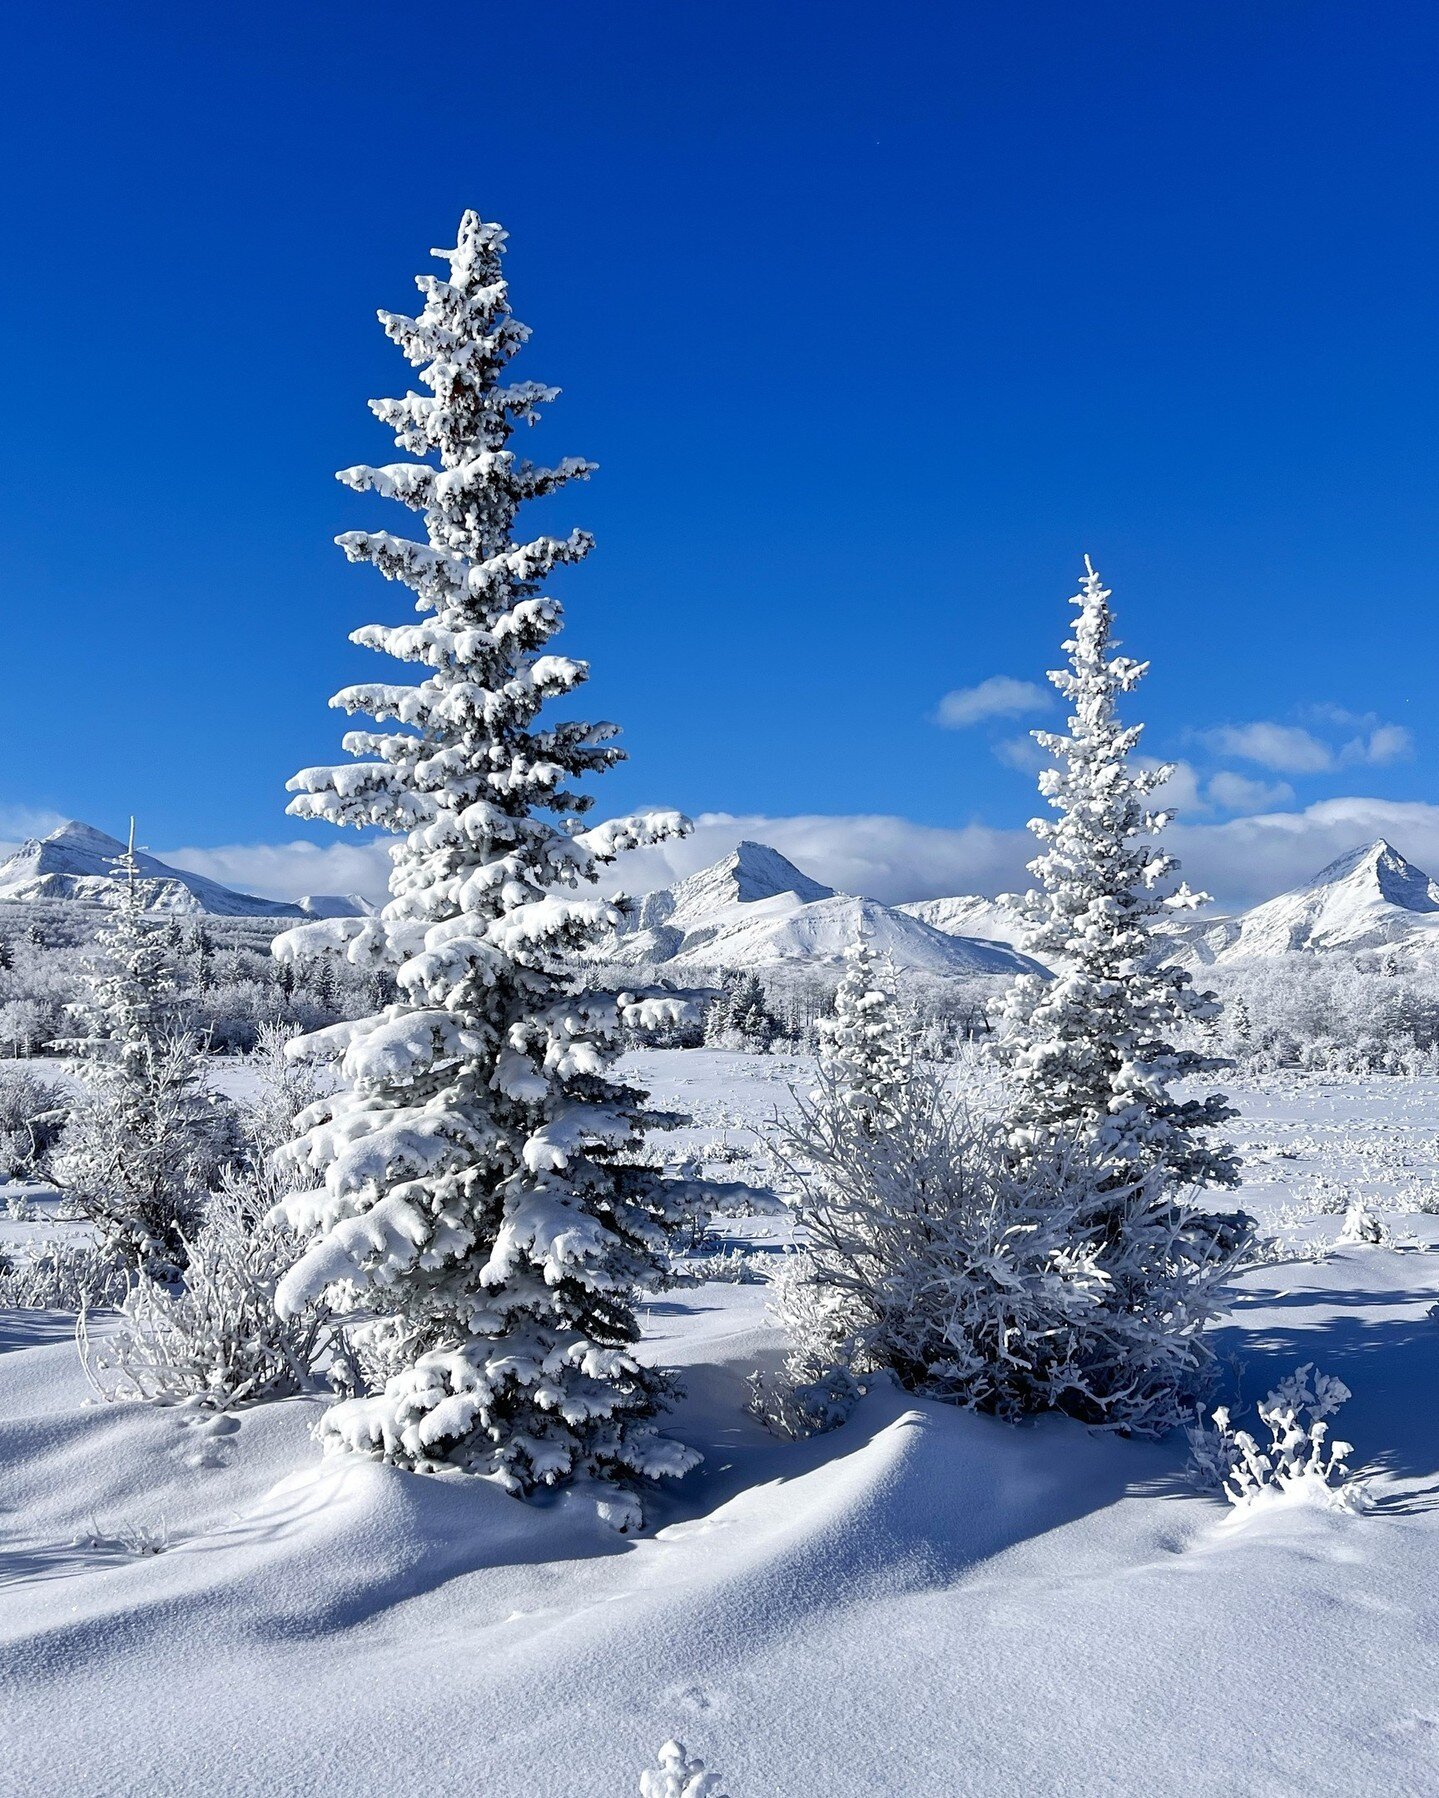 Will Thanksgiving Ranch witness another beautiful snowy landscape before summer arrives? ⁠
According to oddsmakers in Vegas, there is a 9:1 probability that we will see another covering of snow. What are your thoughts on this?⁠
⁠
#winter #winters #wi